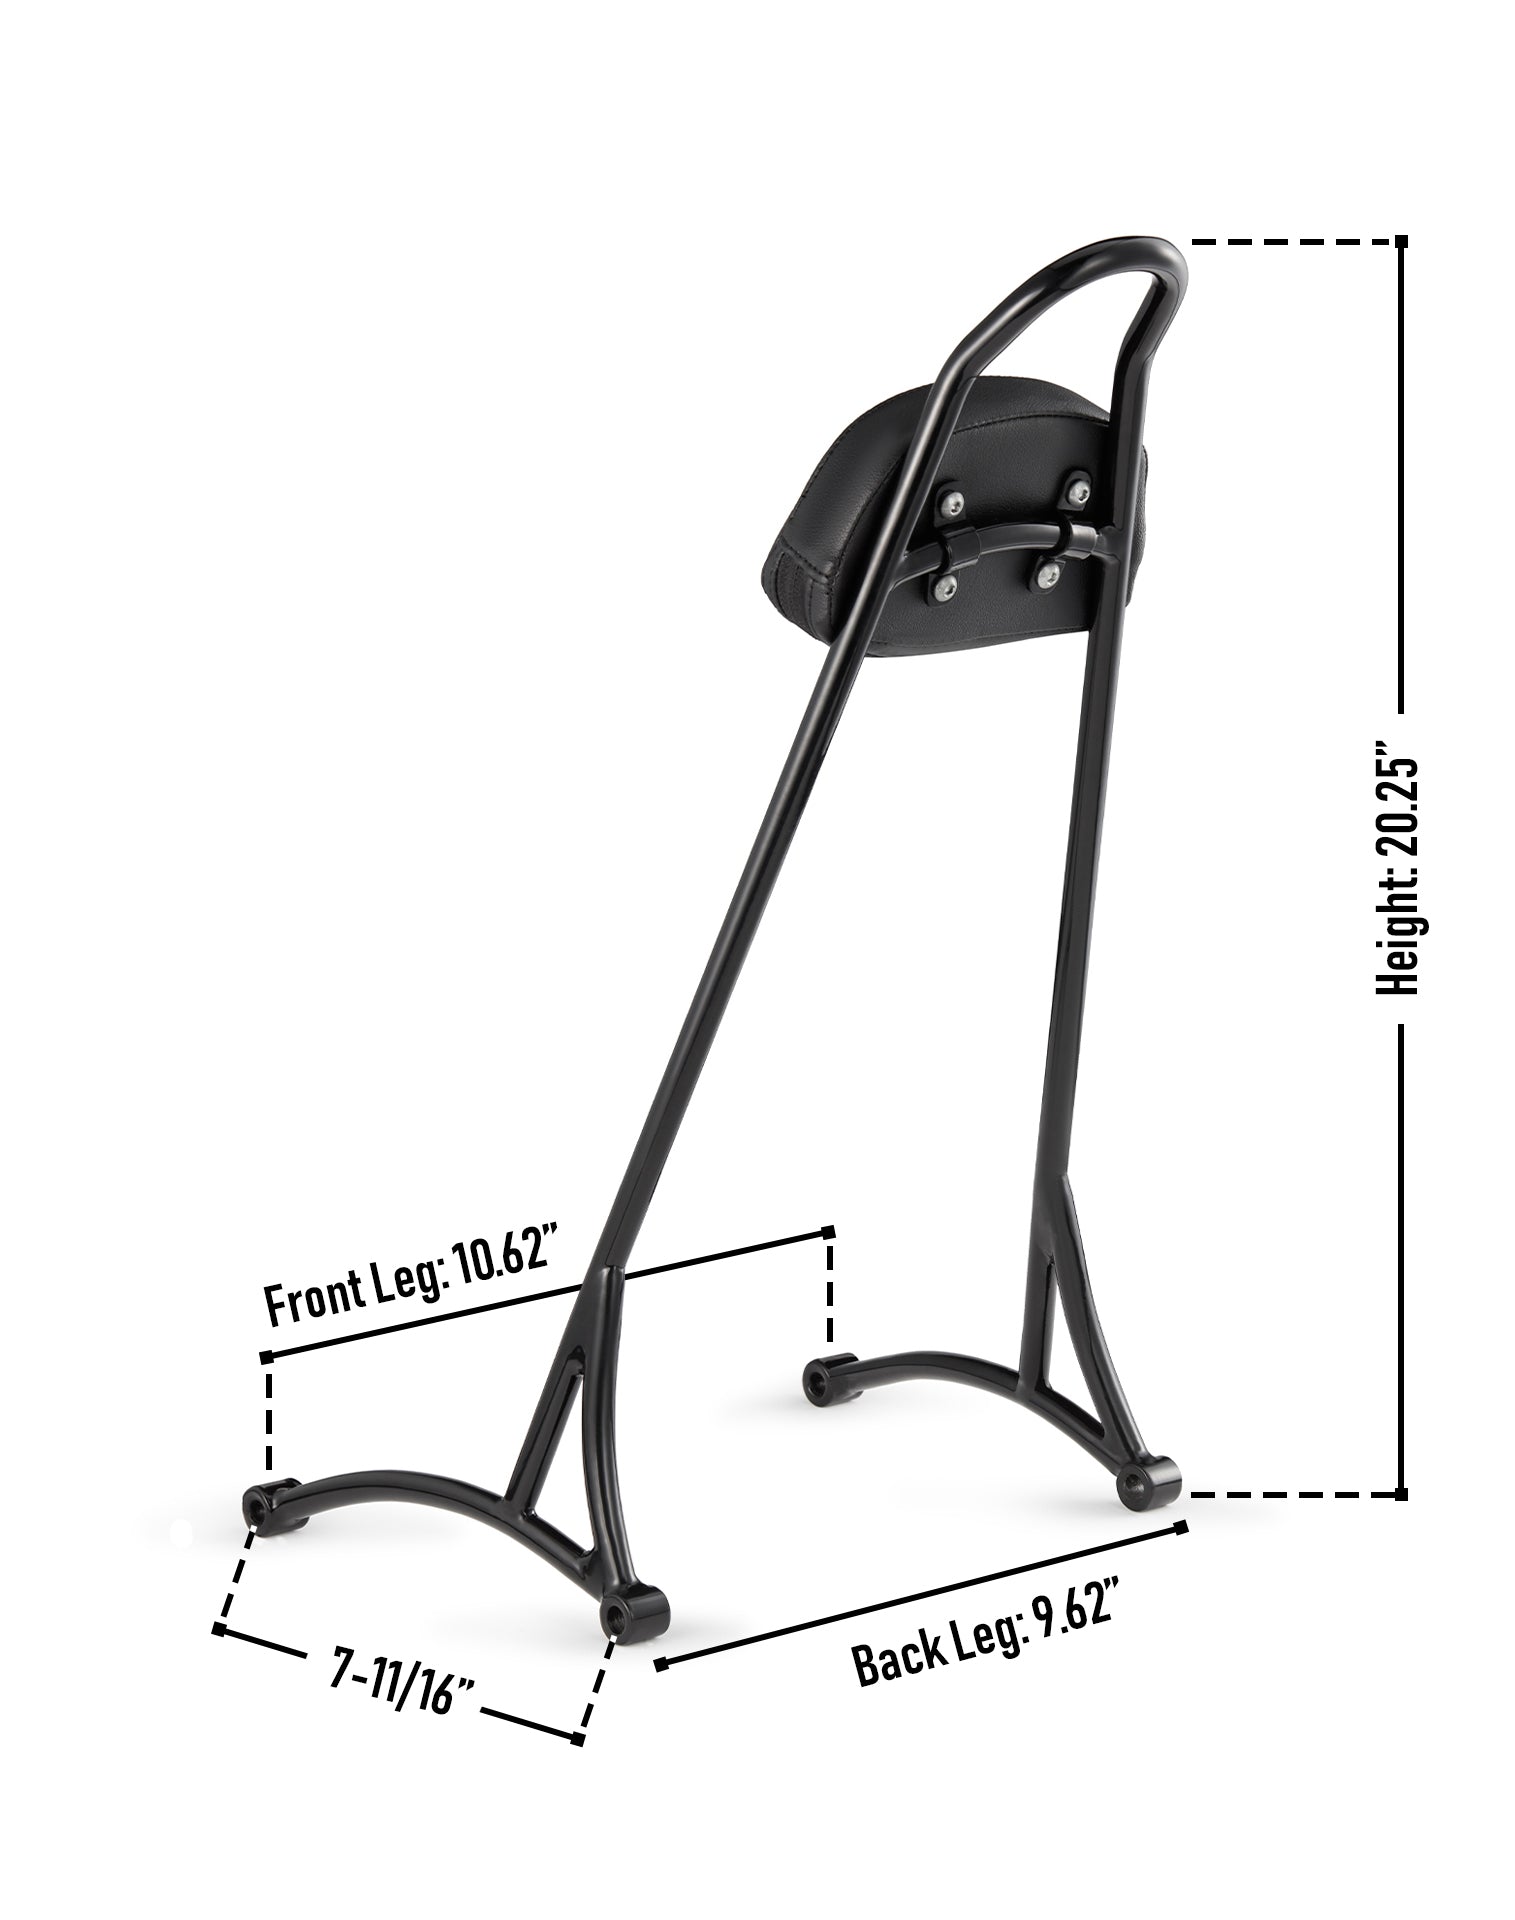 Viking Iron Born 20" Sissy Bar with Backrest Pad for Harley Sportster 1200 Nightster XL1200N Gloss Black Dimension